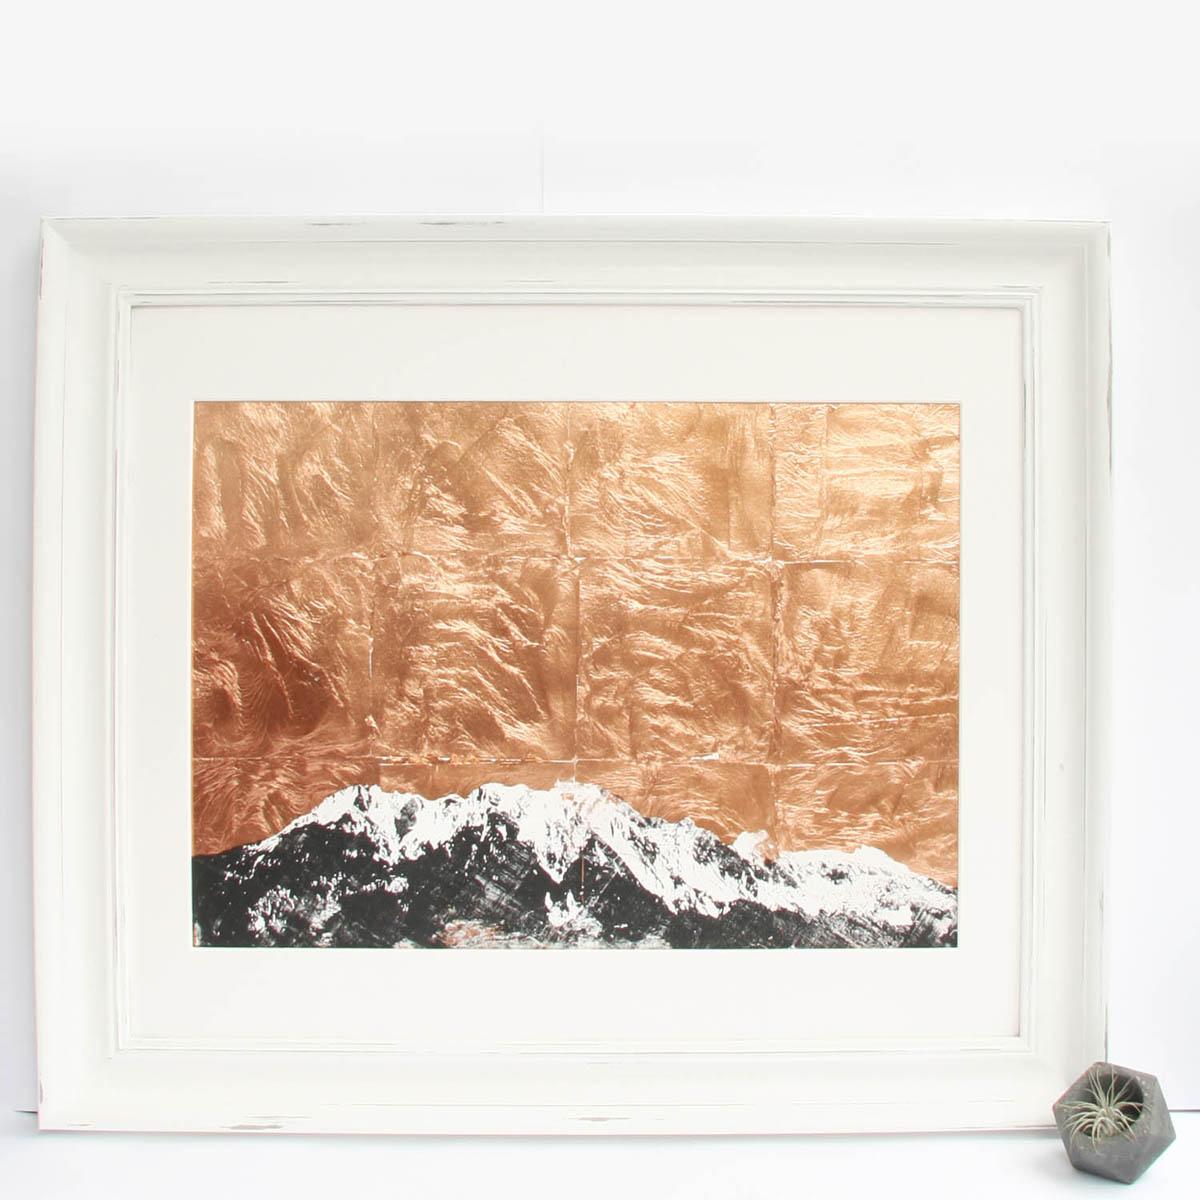 Perfect, Katie Edwards
Limited Edition Original Silkscreen Print of 10
Original Handmade Silk Screen Print of Mountains on Copper Leaf
Mounted size: H 56cm x W 71cm
Image size:

Perfect is about the mountains and how they make you feel. Limited